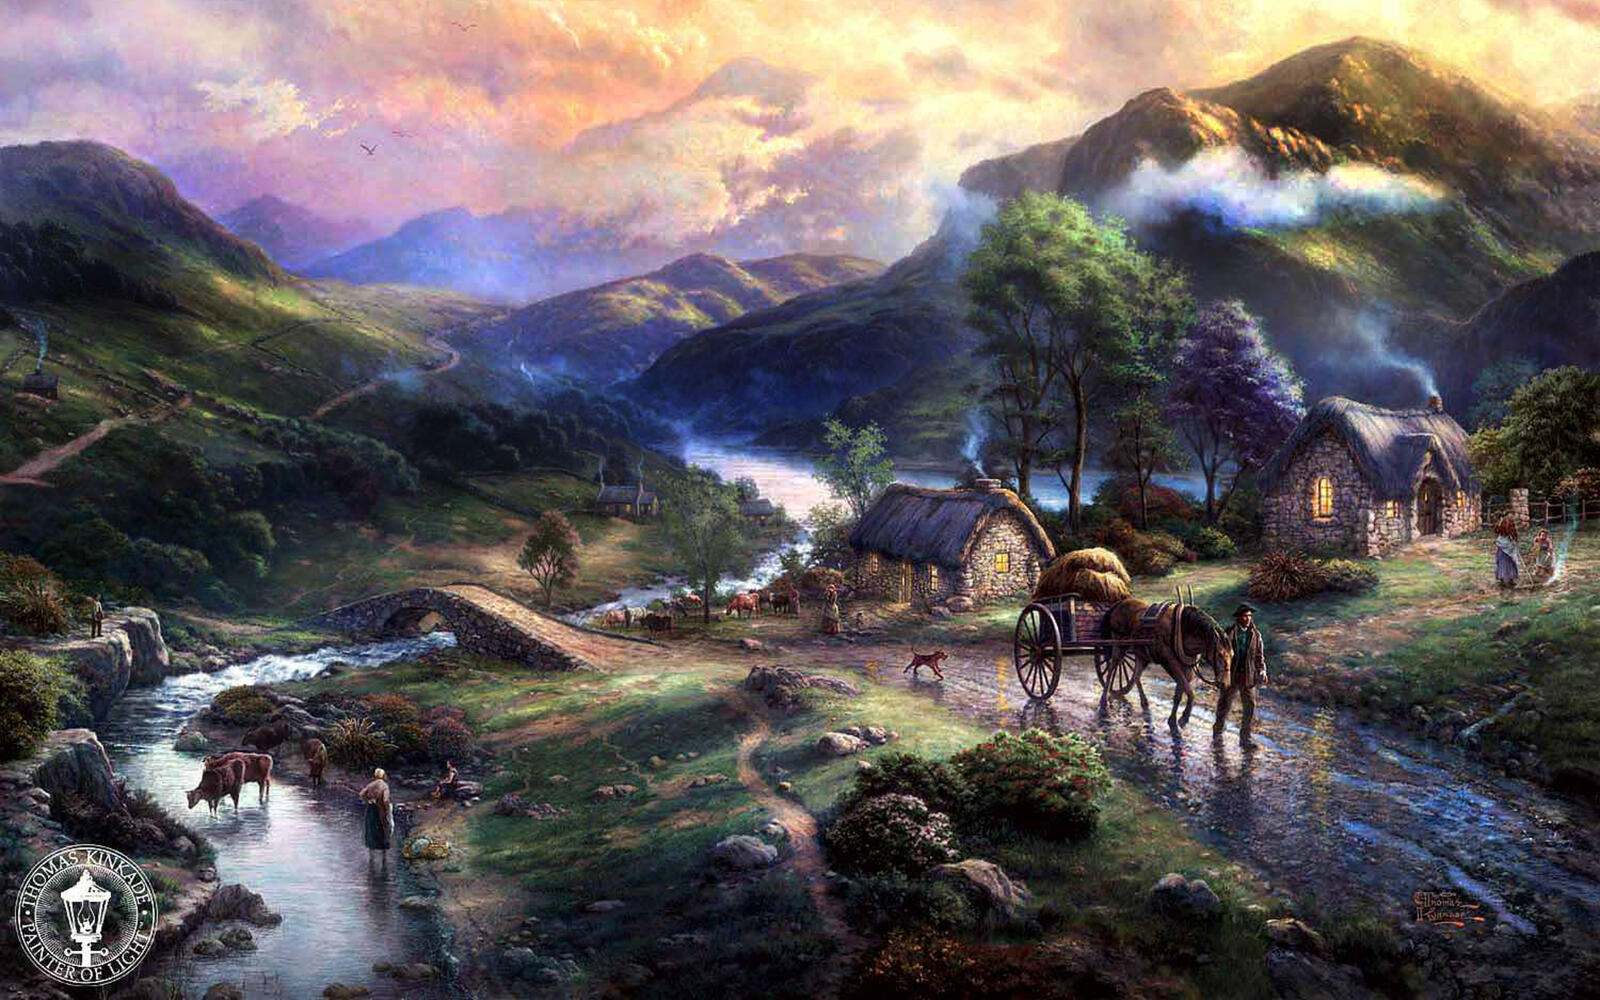 Wallpapers art emerald valley painting on the desktop